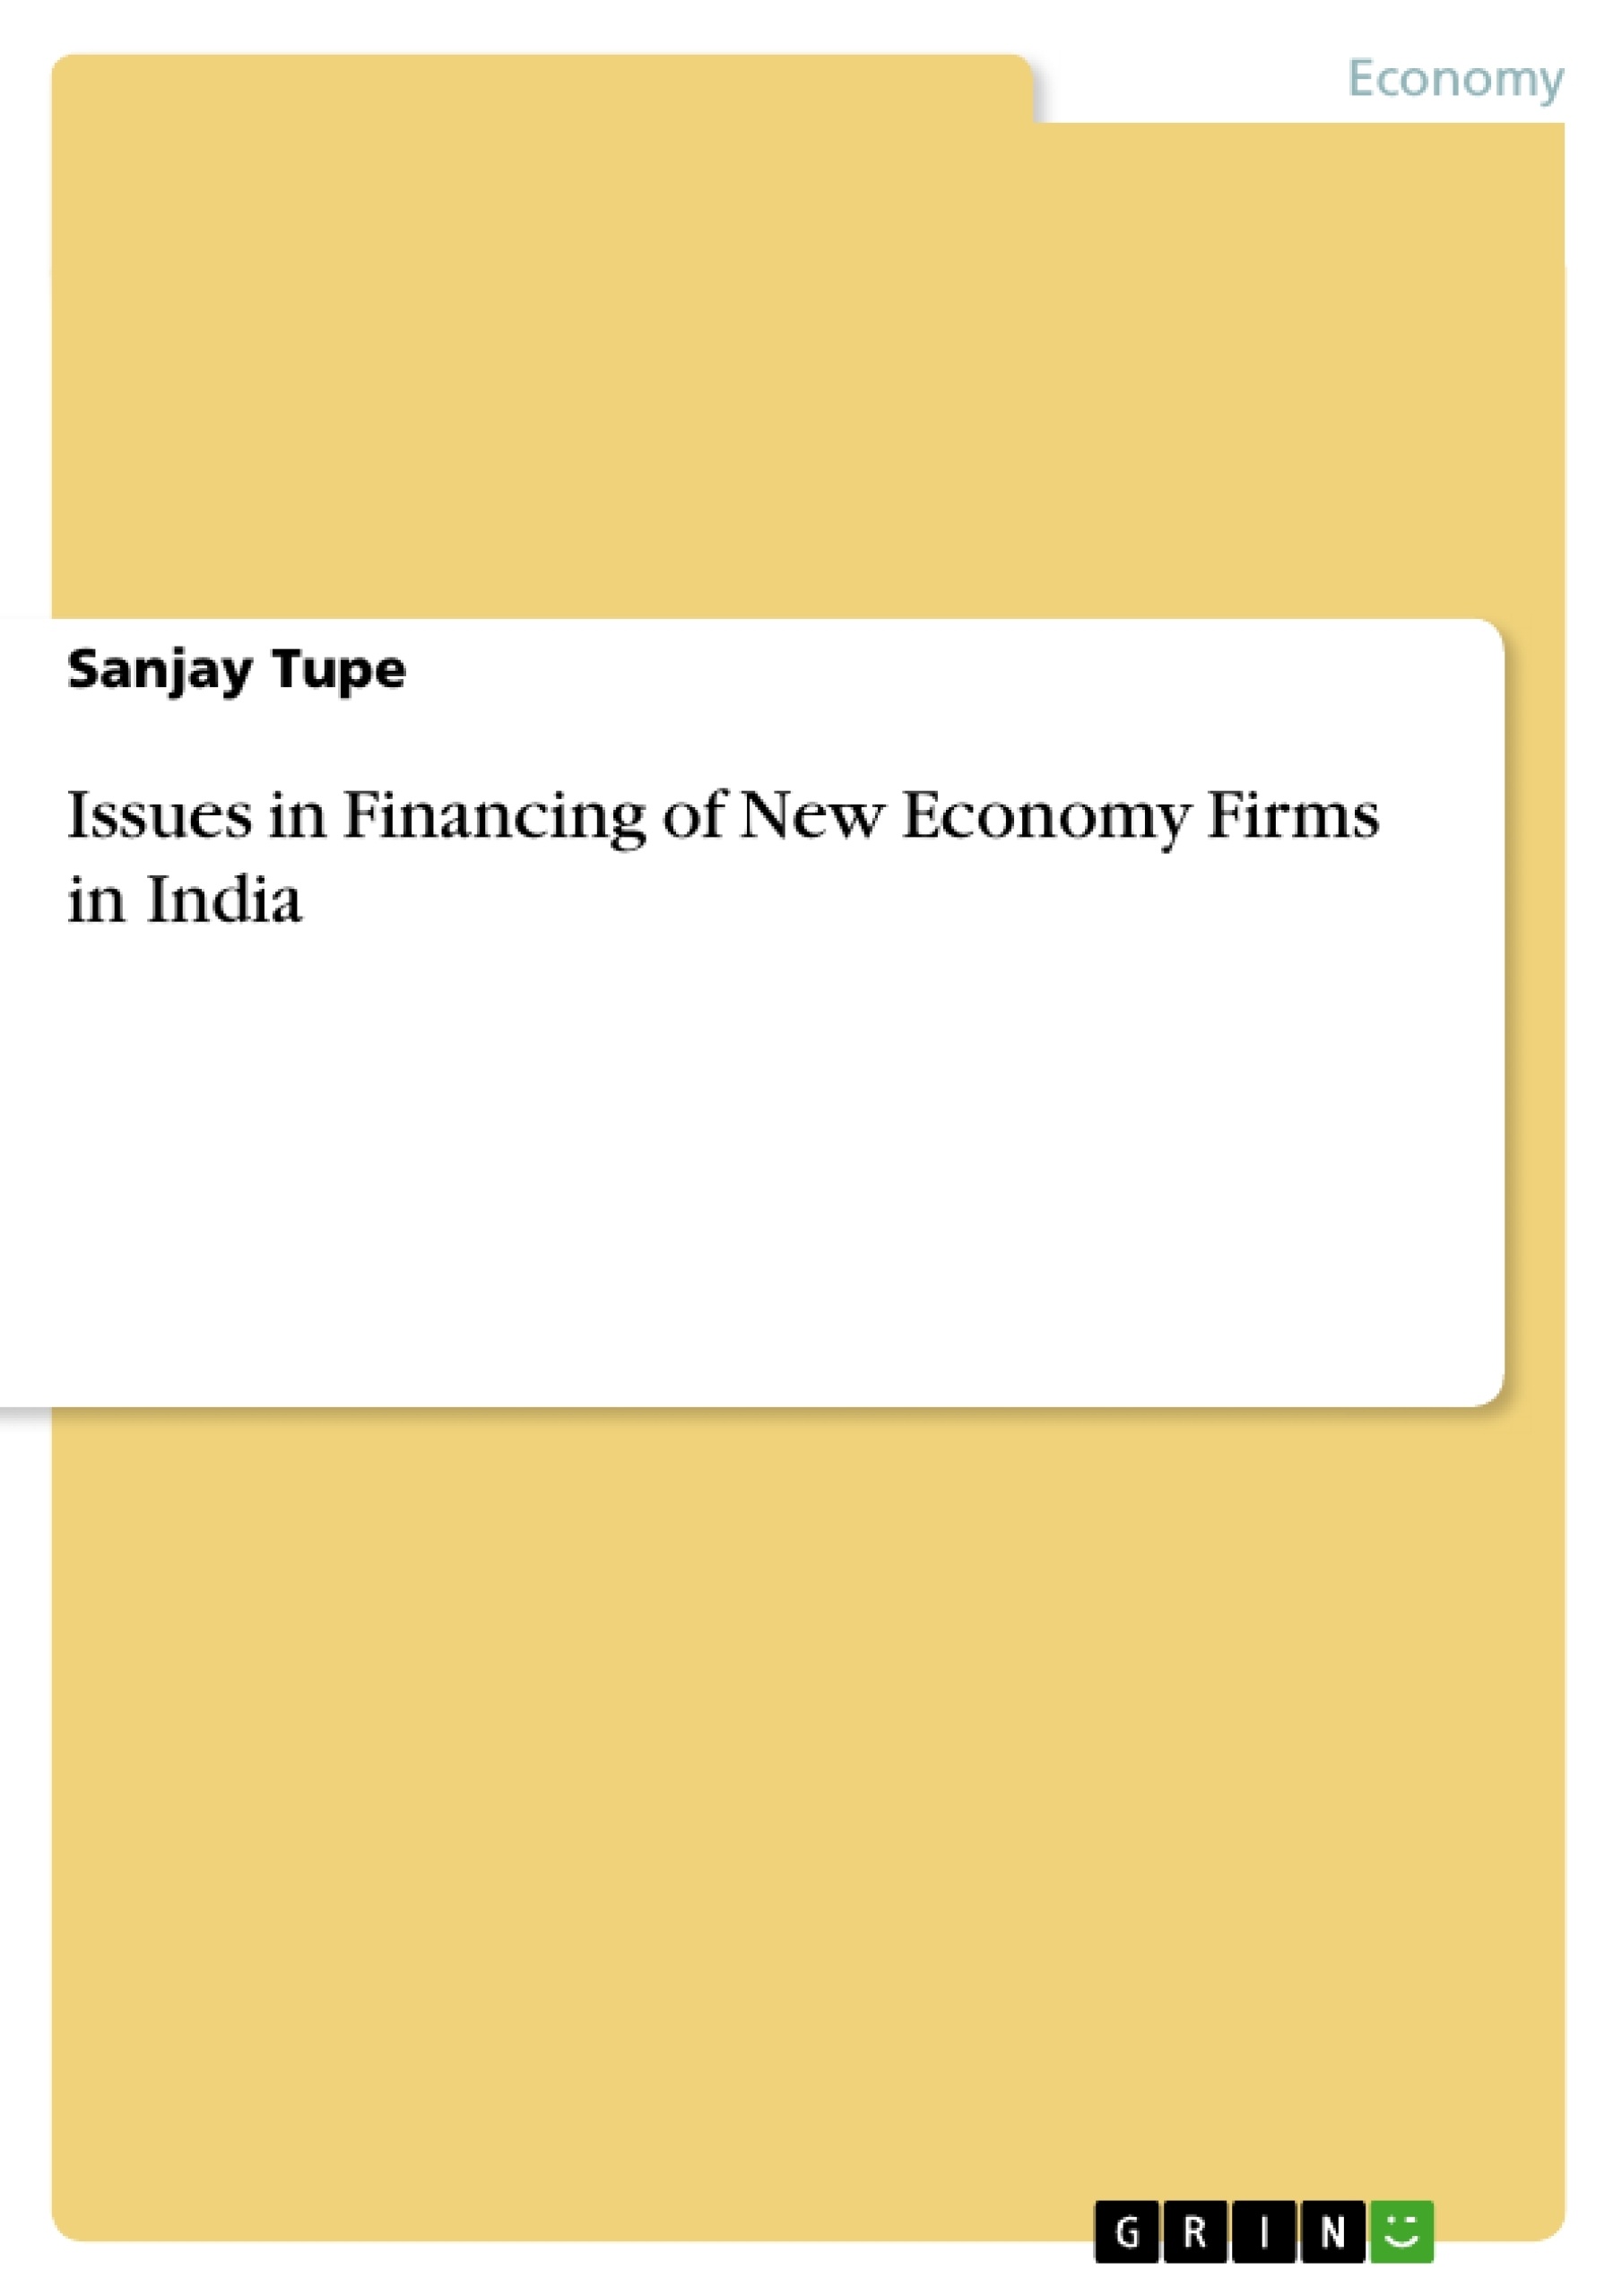 Título: Issues in Financing of New Economy Firms in India